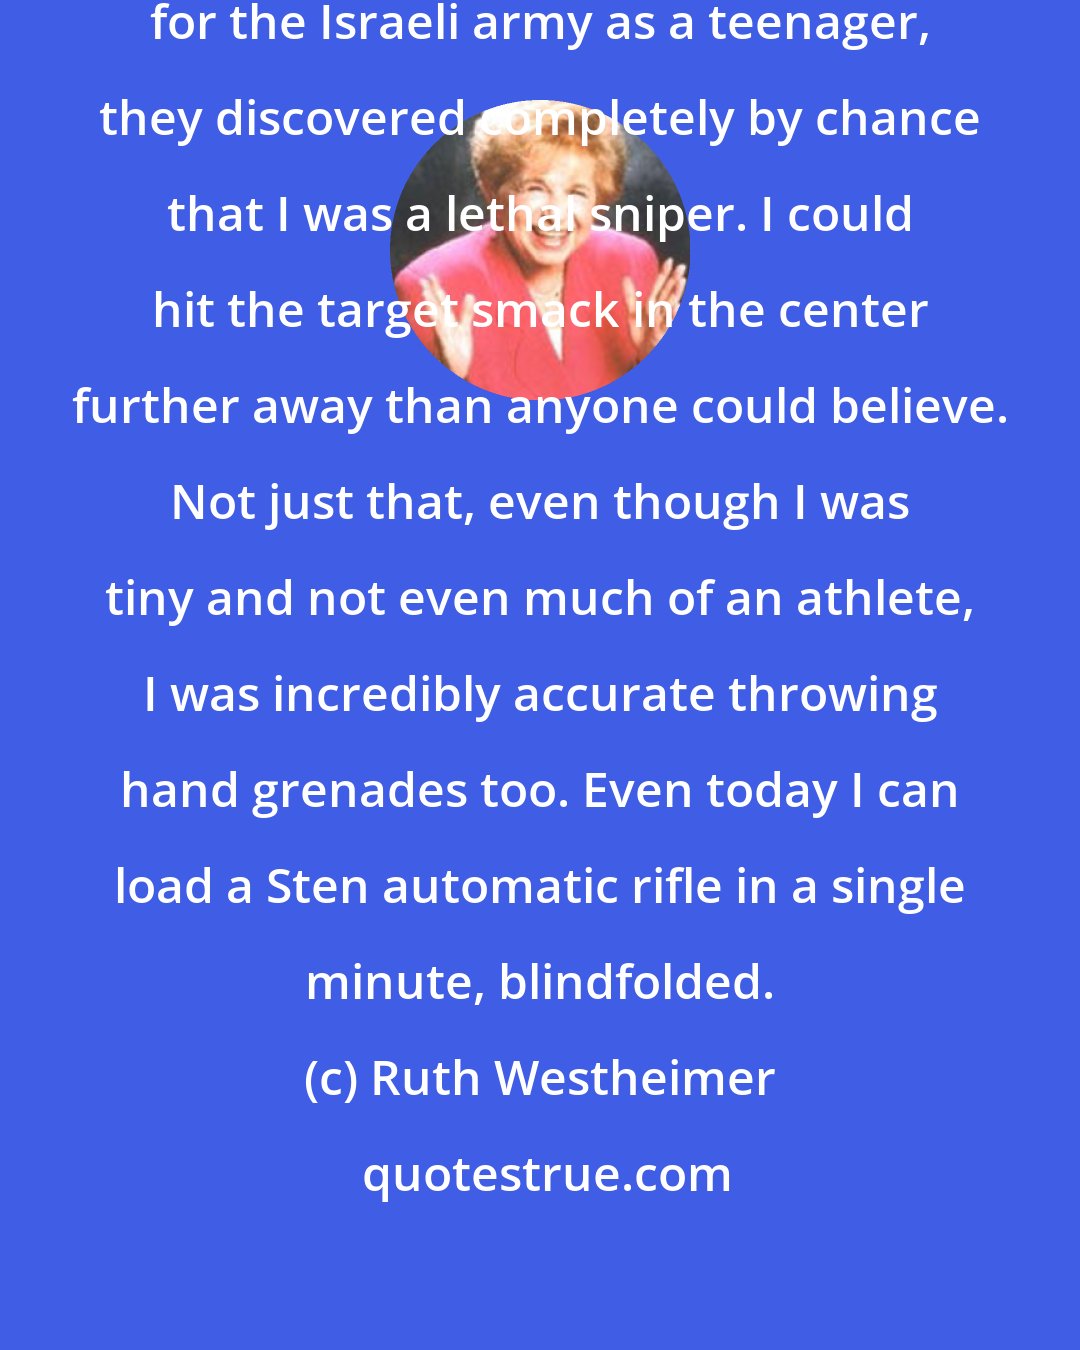 Ruth Westheimer: When I was in my routine training for the Israeli army as a teenager, they discovered completely by chance that I was a lethal sniper. I could hit the target smack in the center further away than anyone could believe. Not just that, even though I was tiny and not even much of an athlete, I was incredibly accurate throwing hand grenades too. Even today I can load a Sten automatic rifle in a single minute, blindfolded.